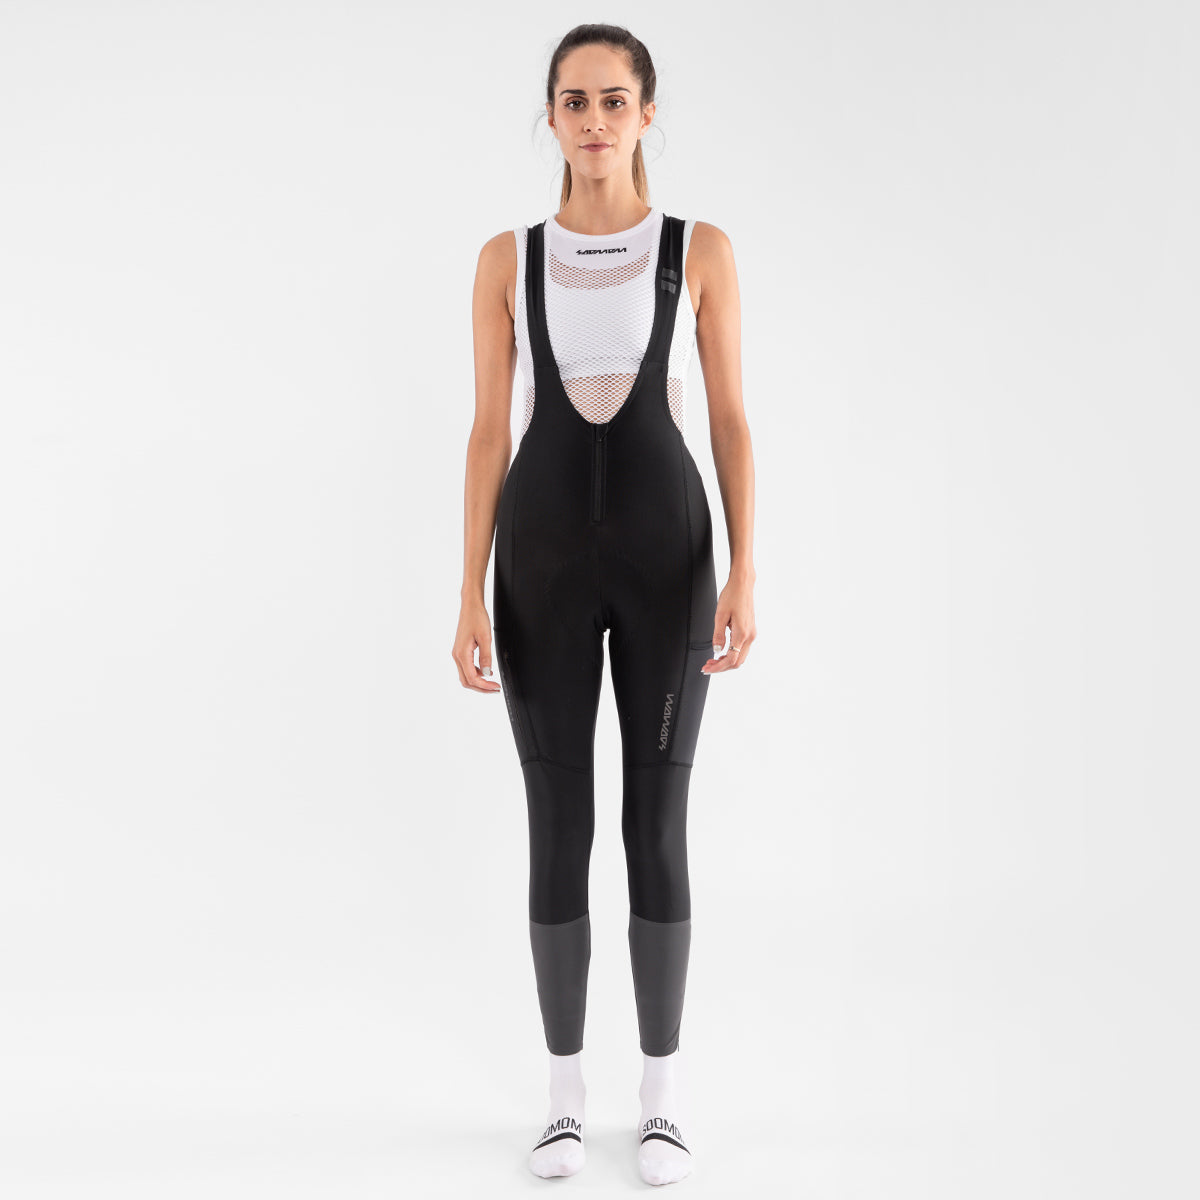 Women's ThermaShell Water-Resistant Bib Tights Black, Buy Women's  ThermaShell Water-Resistant Bib Tights Black here